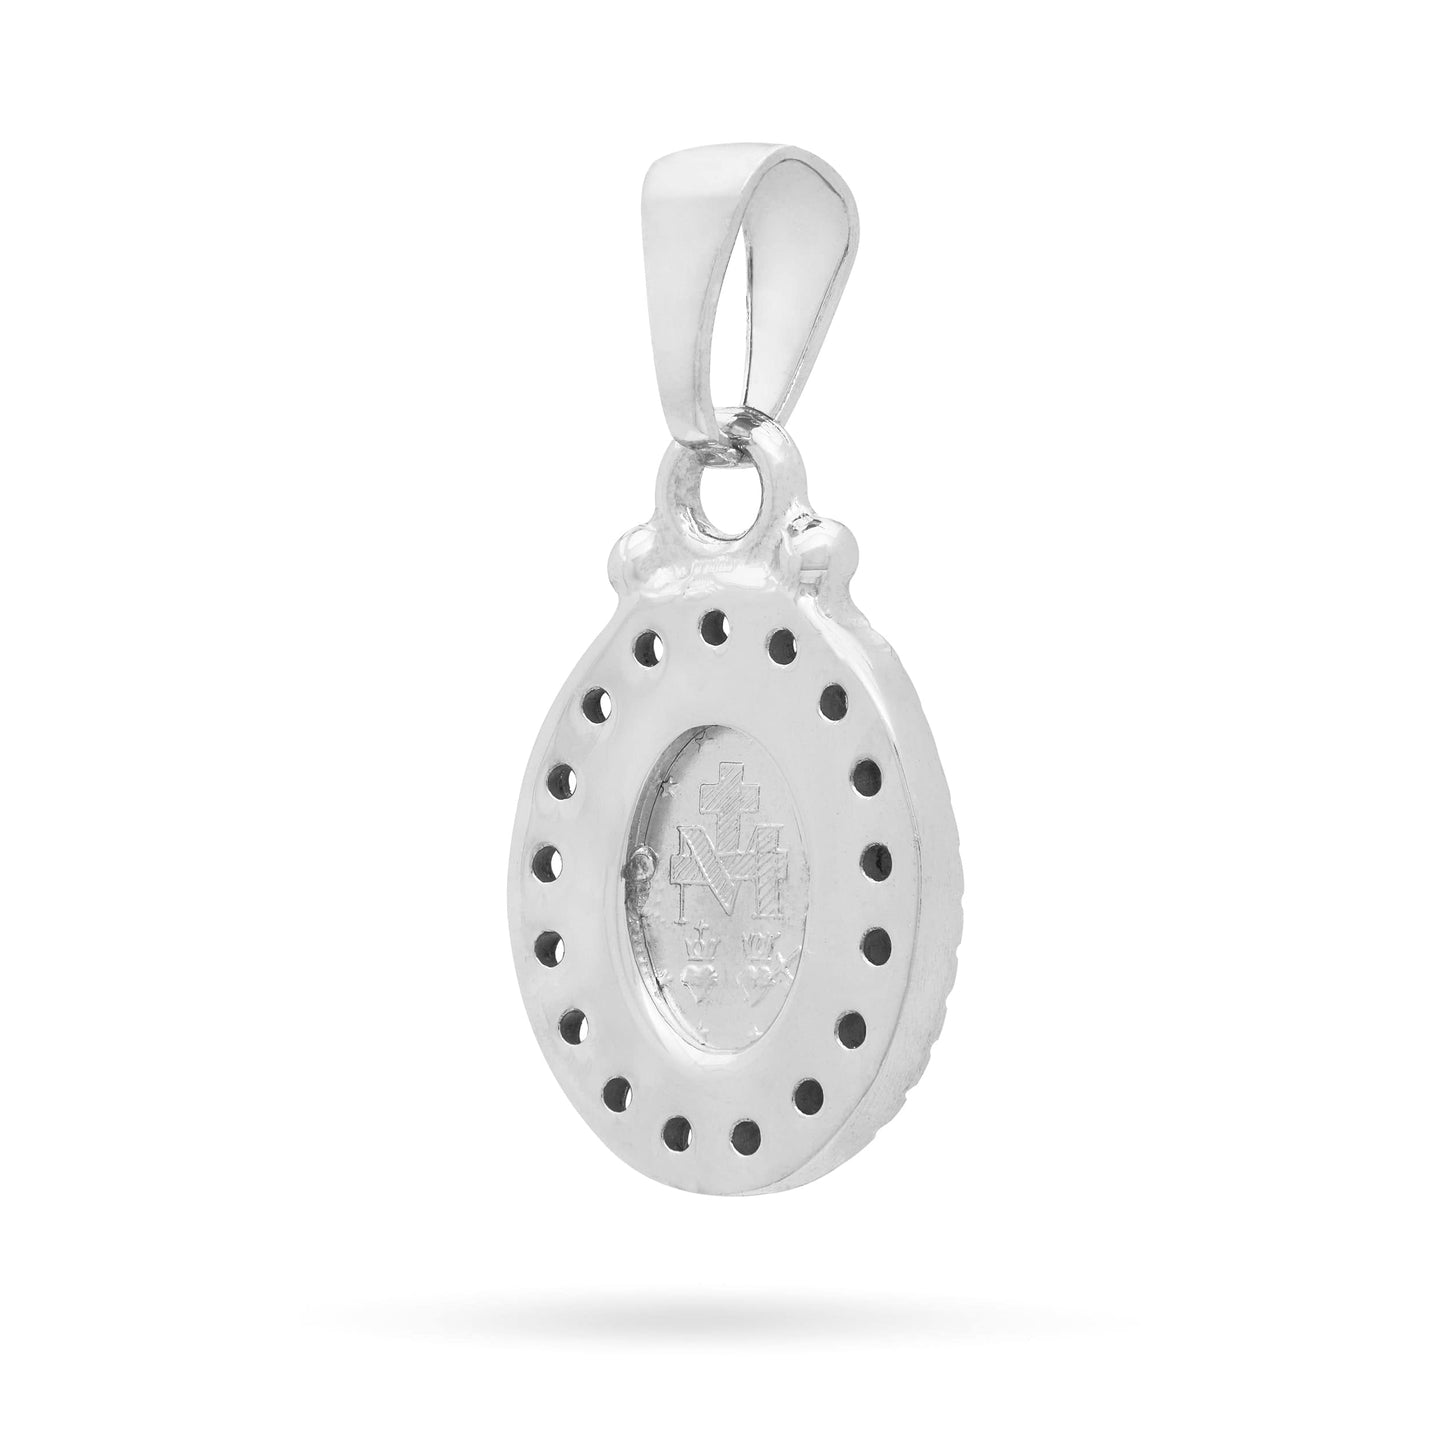 MONDO CATTOLICO Jewelry 11 mm (0.43 in) Pendant of Miraculous Mary White Gold